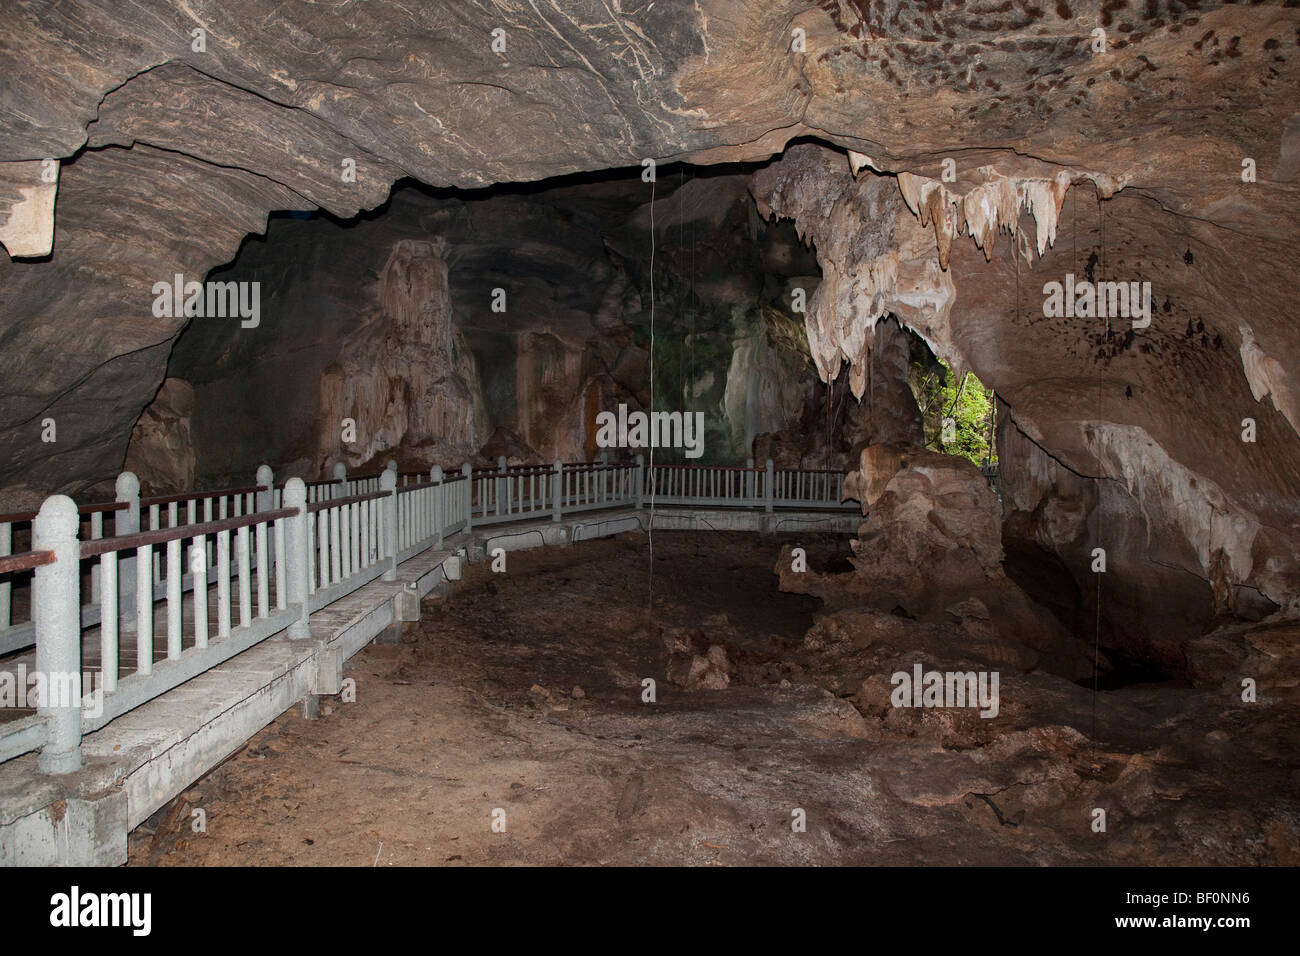 Langkawi Geopark, Bat cave interior with walkway Stock Photo